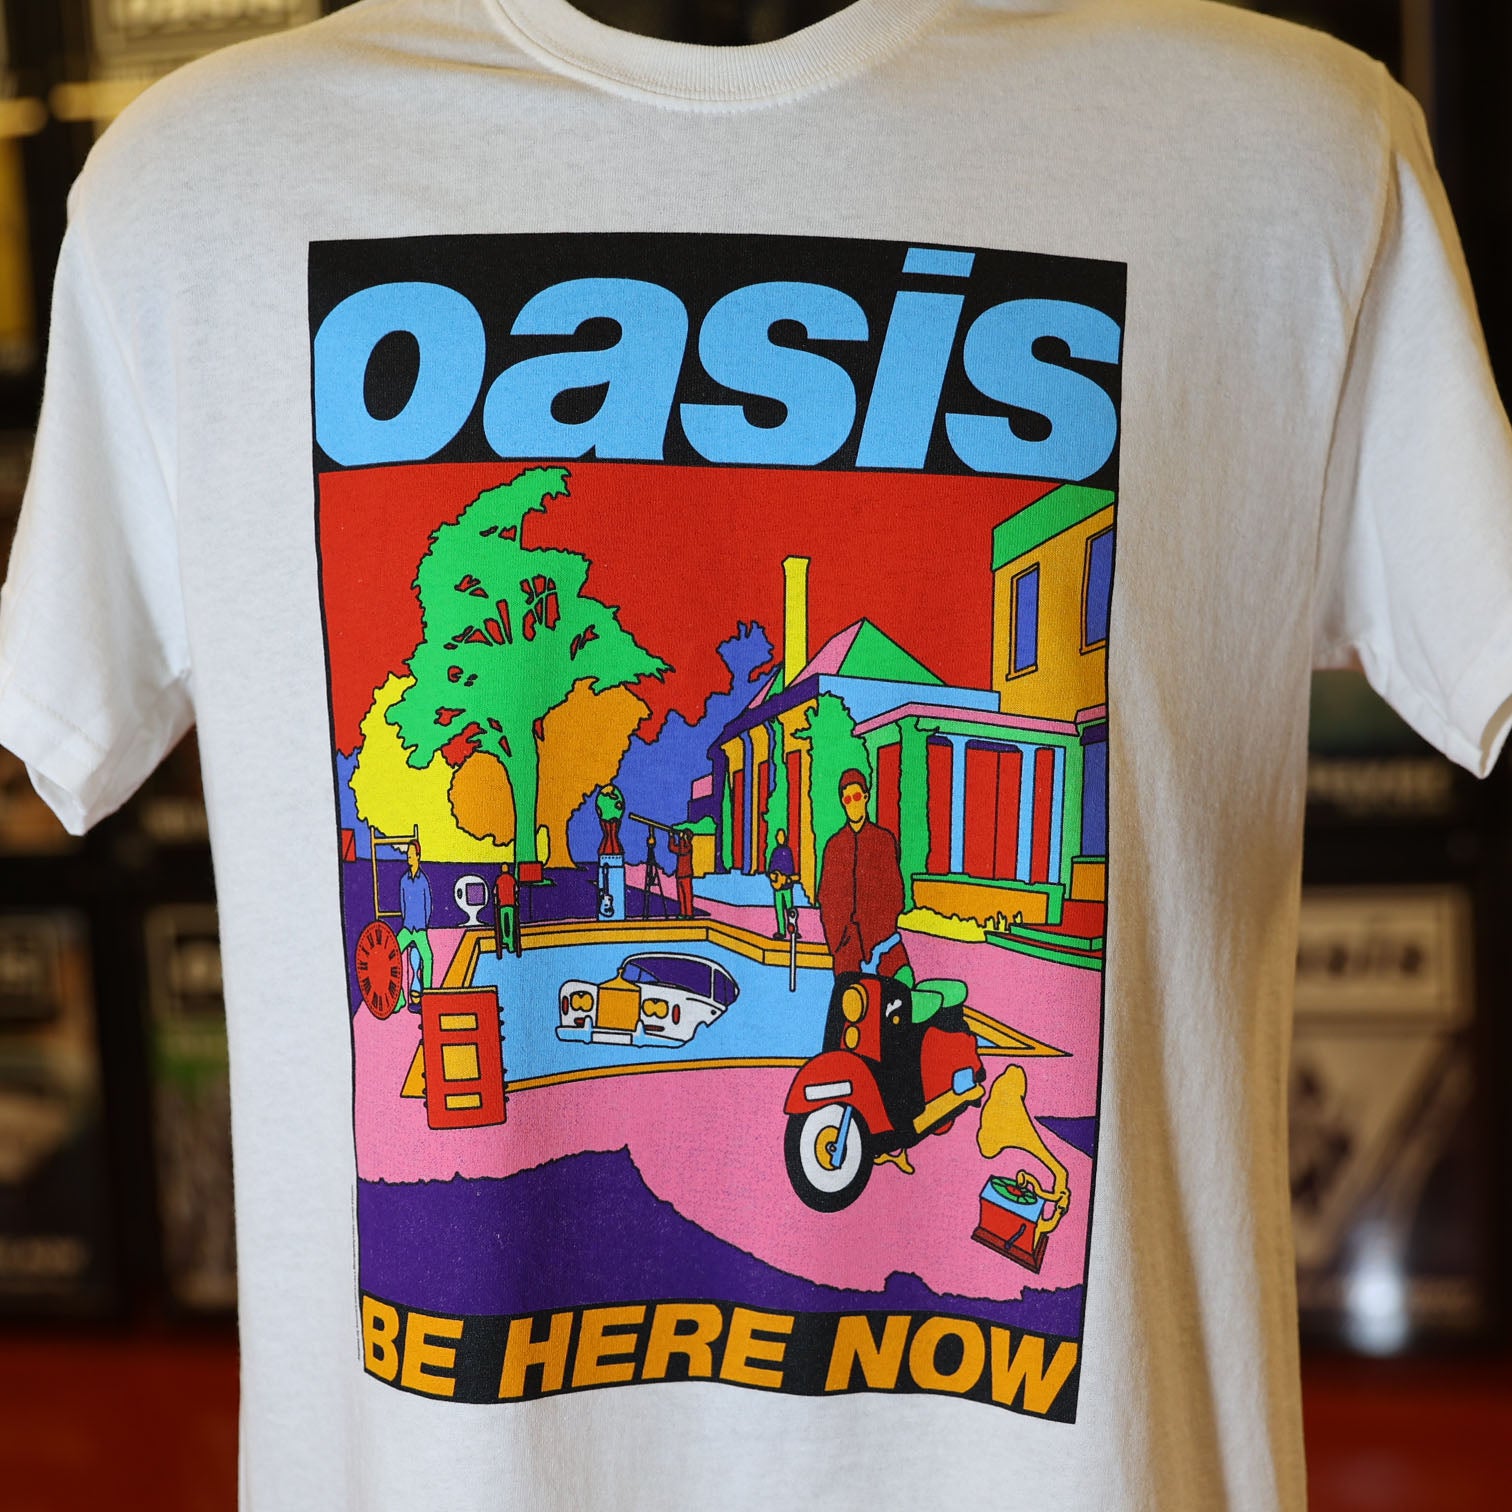 Oasis - Be Here Now T Shirt - New Item